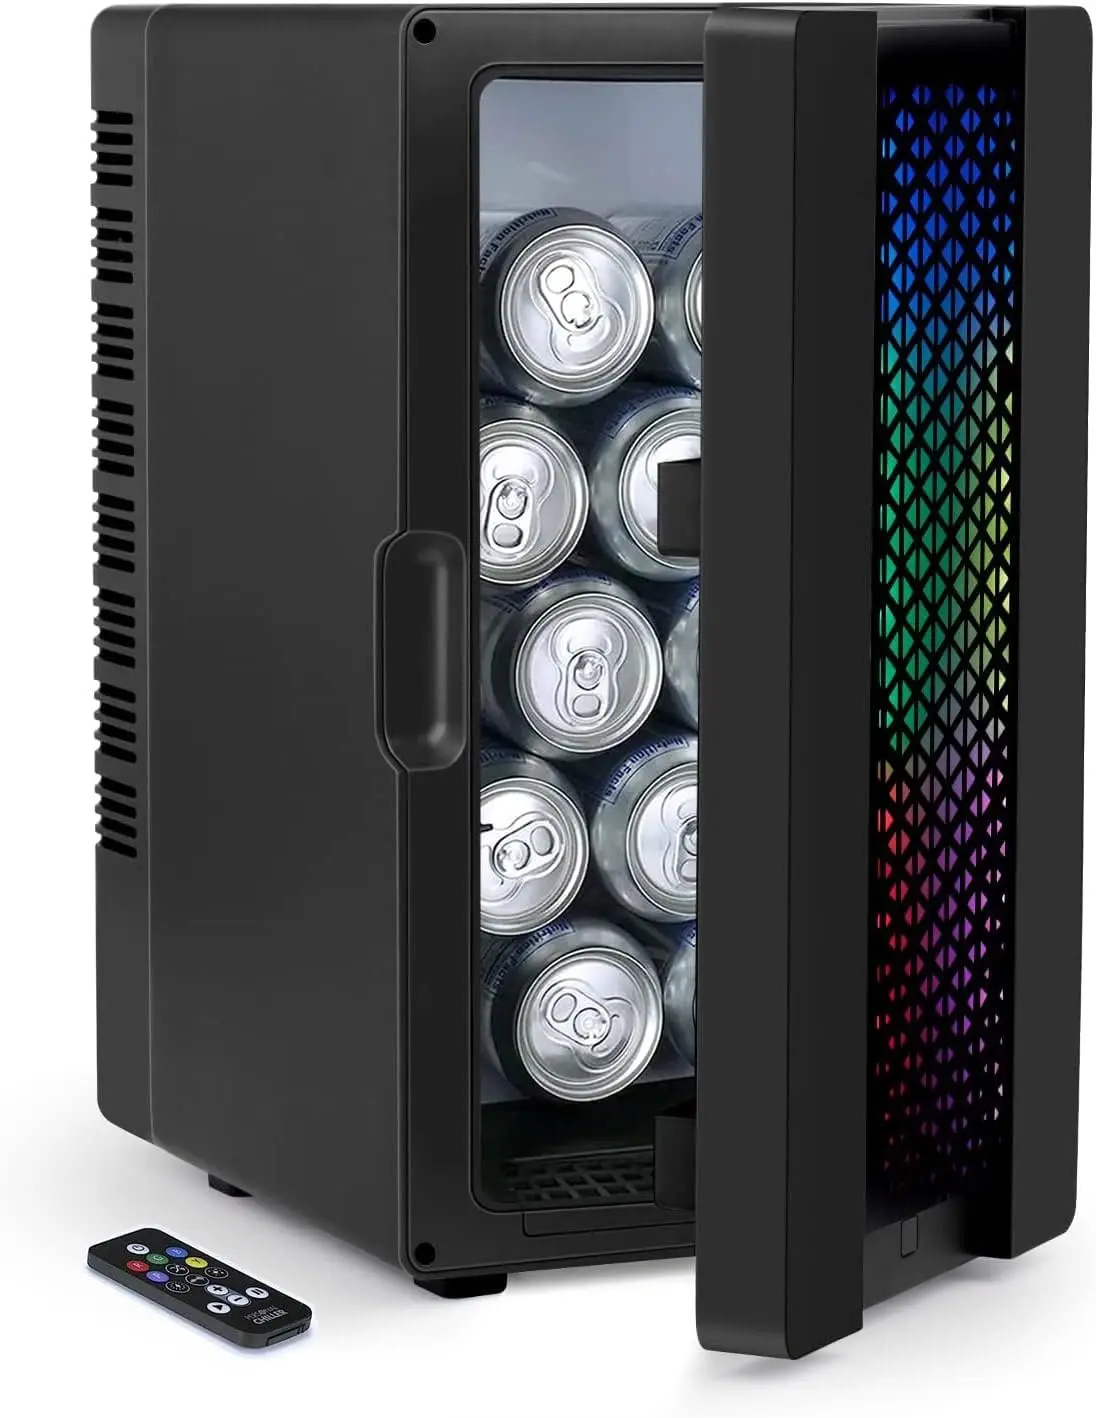 

CHILLER 10L Mini Fridge with Colorful LED Lights, 10 Cans Cooler Beverage Refrigerator, Upgrade Color-changing RGB Lights Contro